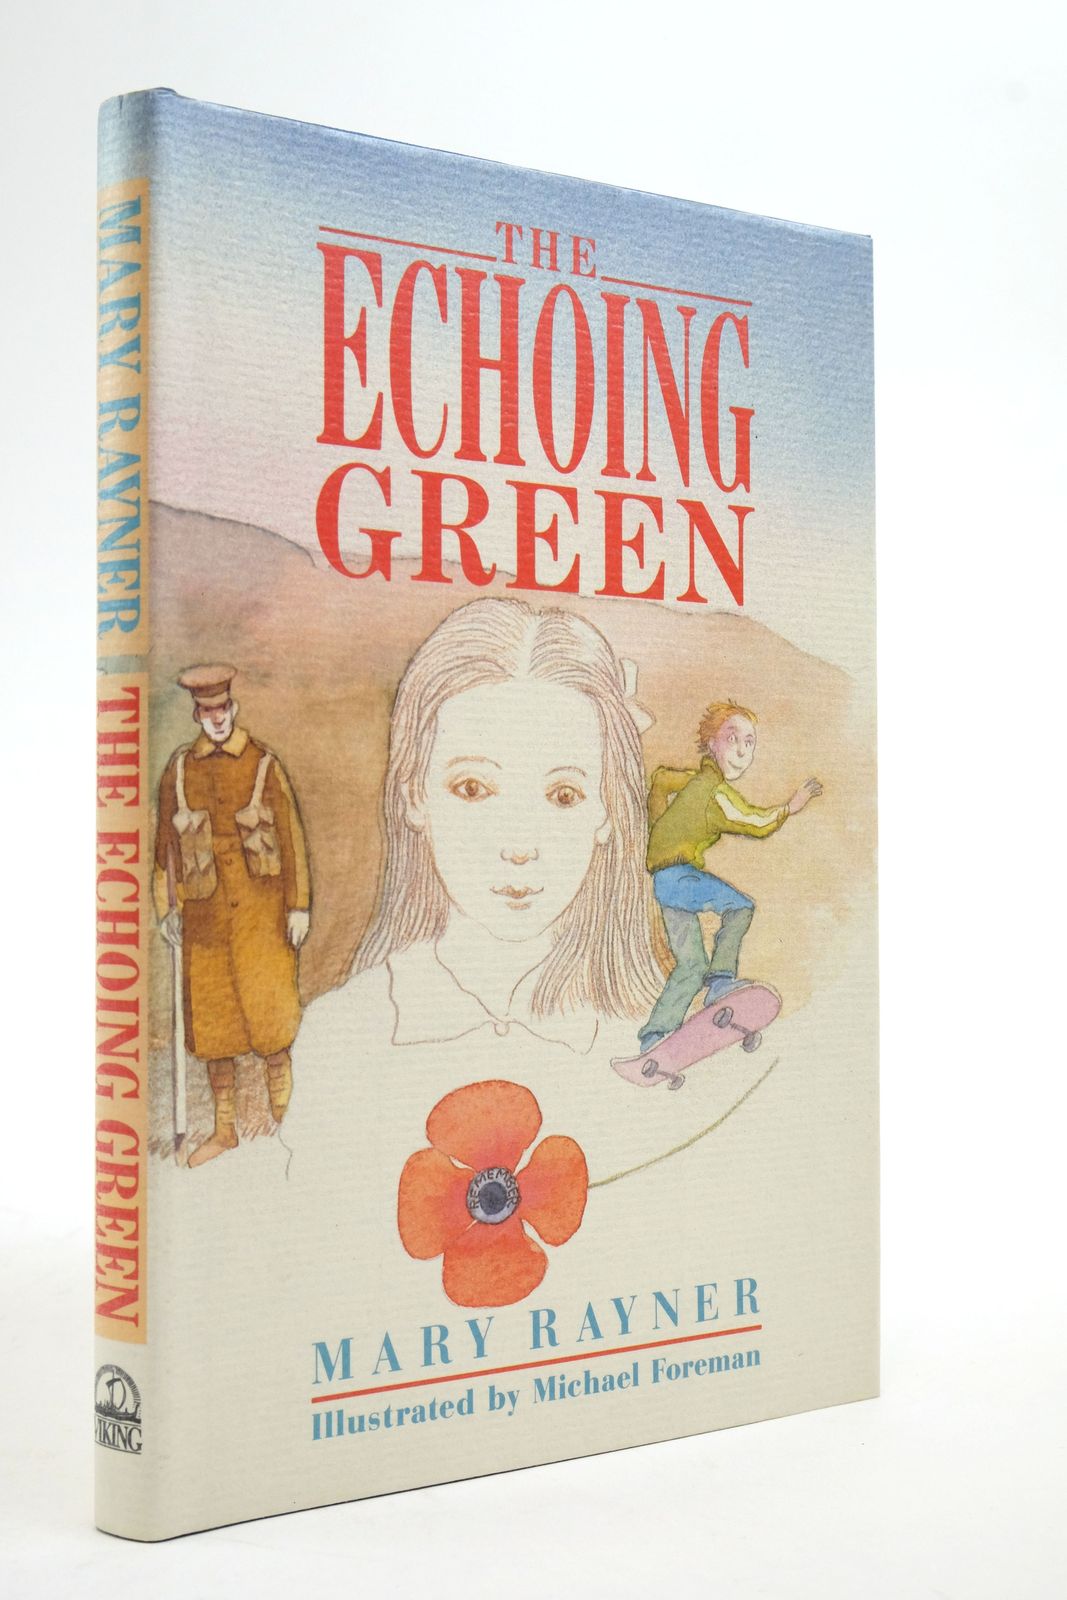 Photo of THE ECHOING GREEN written by Rayner, Mary illustrated by Foreman, Michael published by Viking (STOCK CODE: 2138815)  for sale by Stella & Rose's Books